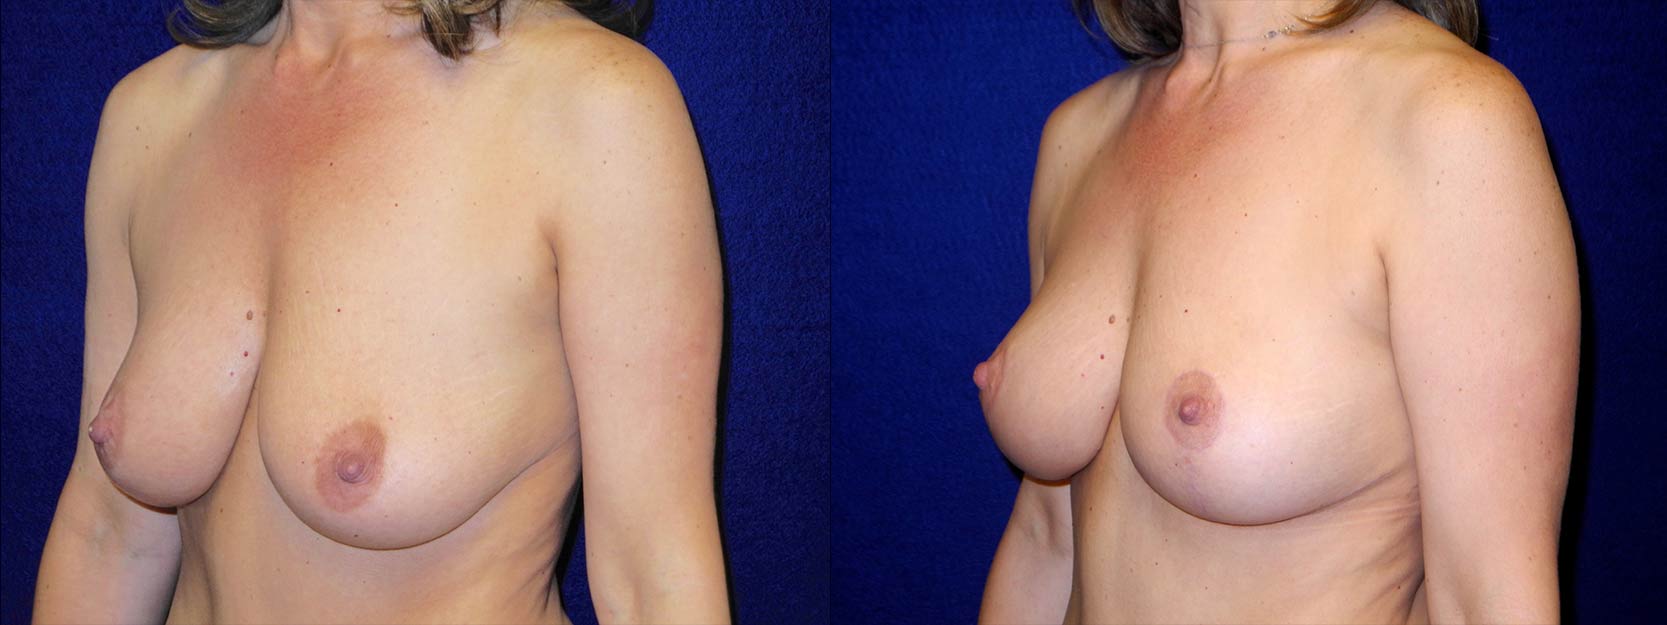 Left 3/4 View - Breast Lift After Pregnancy